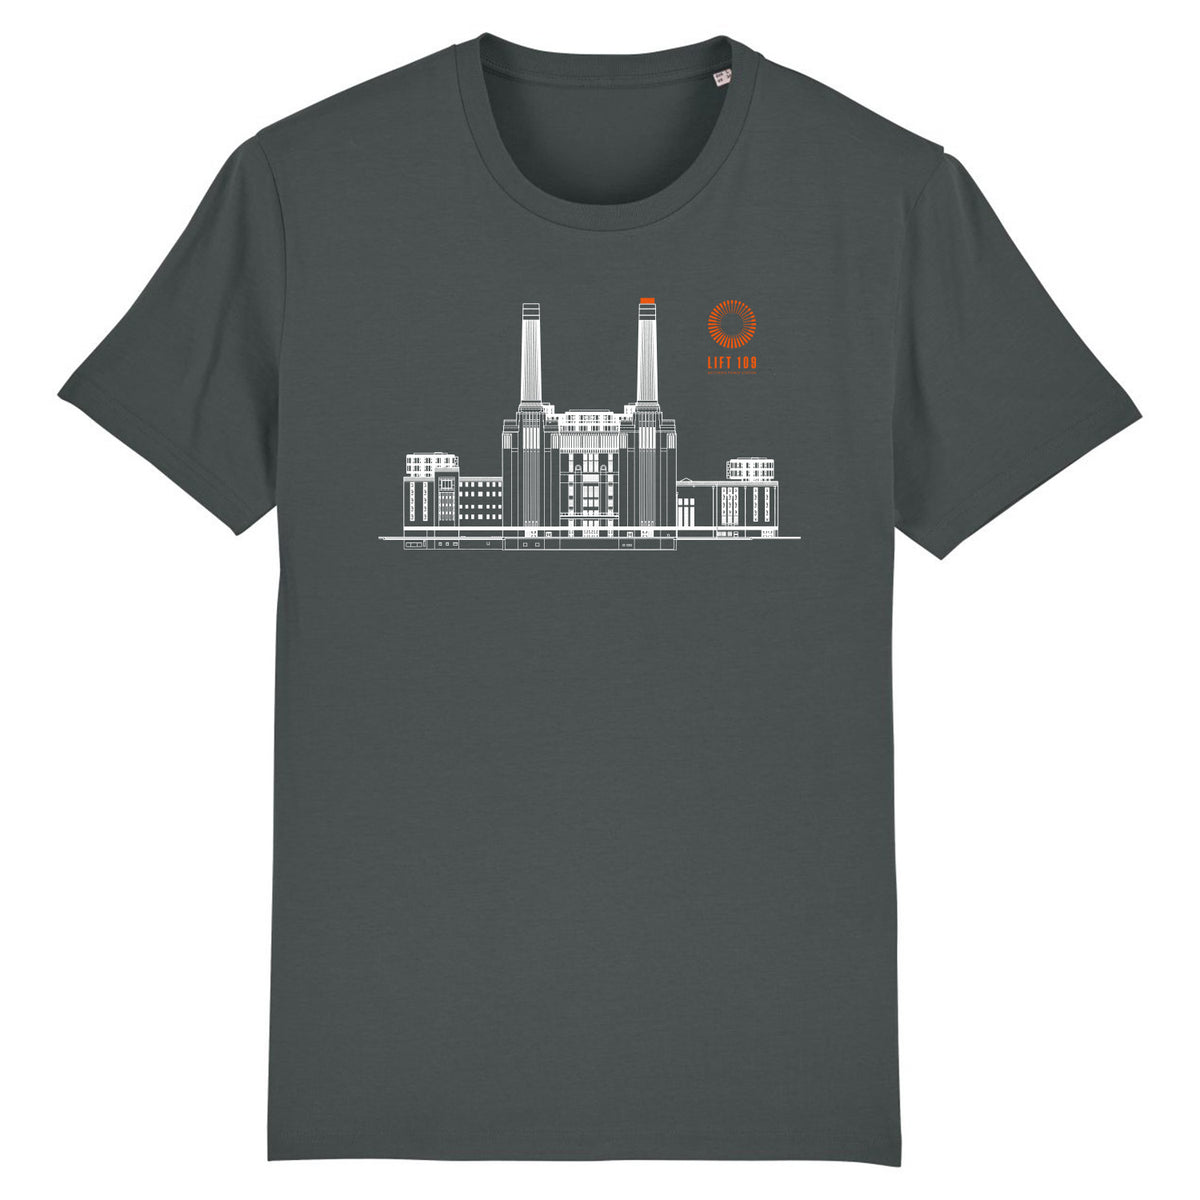 Architectural Drawing - Grey Unisex T-shirt